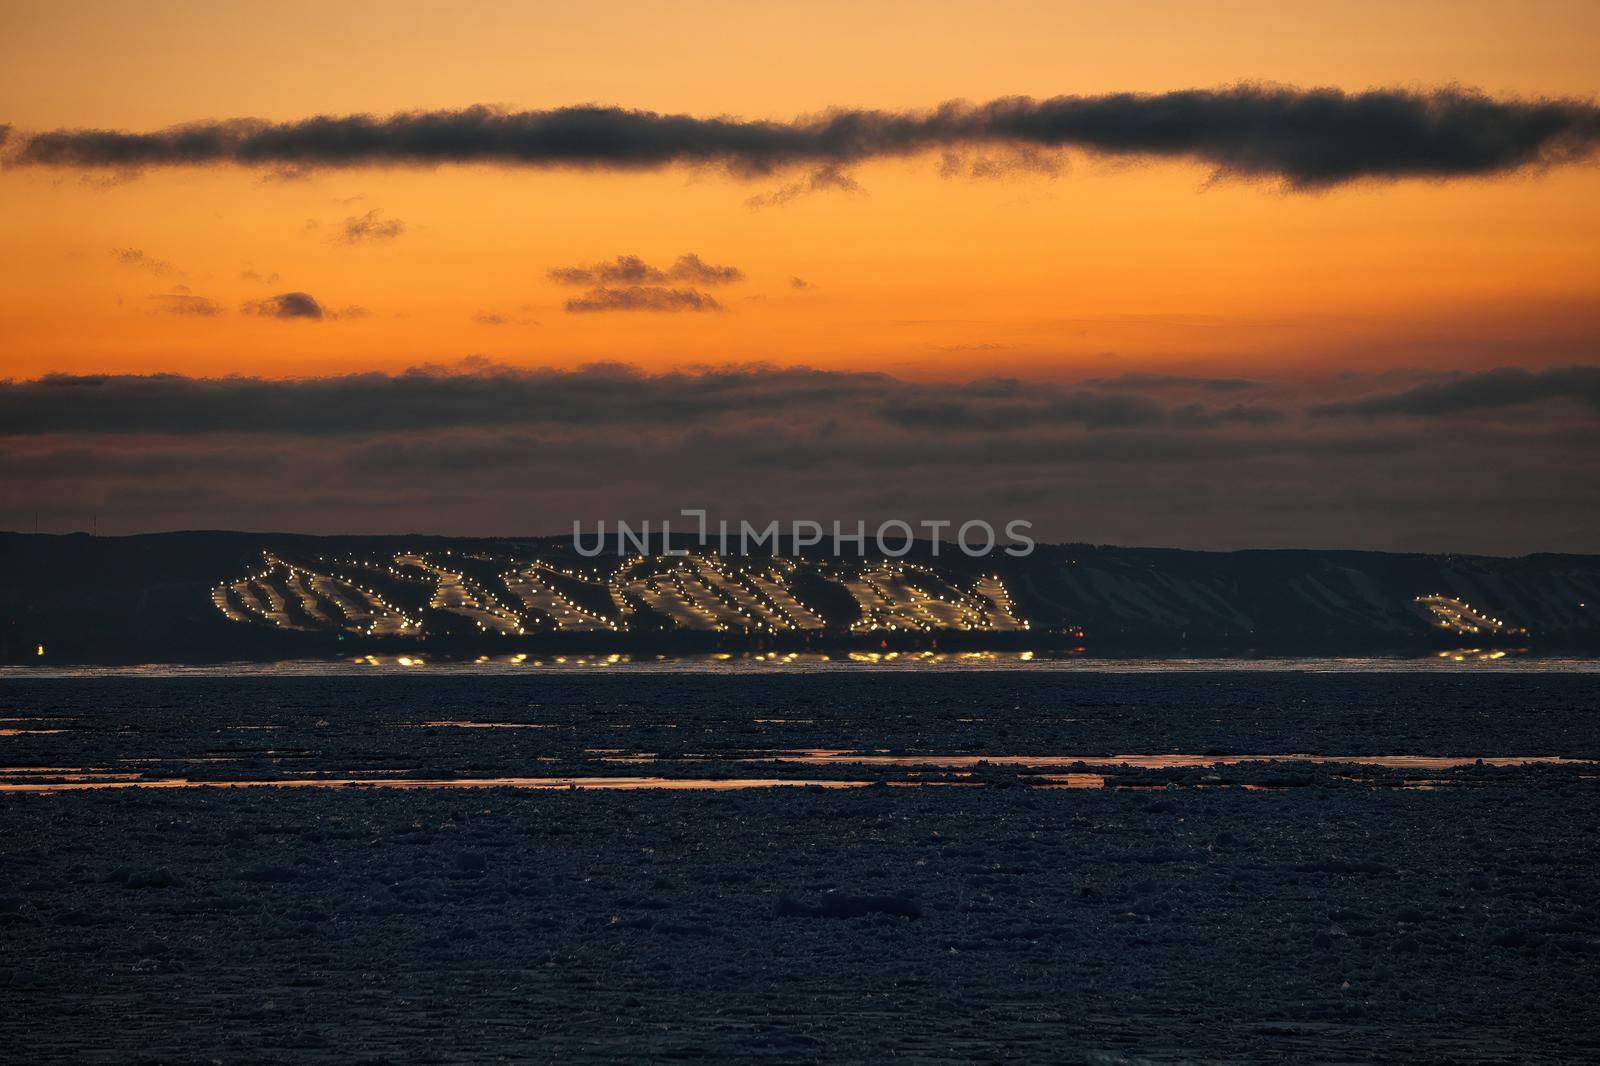 Long telephoto View of Collingwood and Blue Mountain and Craigleith Ski Hills Across Georgian Bay between sunset and twilight in winter. The ski hills are lit up with night lights and the sky is a rich sunset orange color and ice pack is gathered in the bay. High quality photo